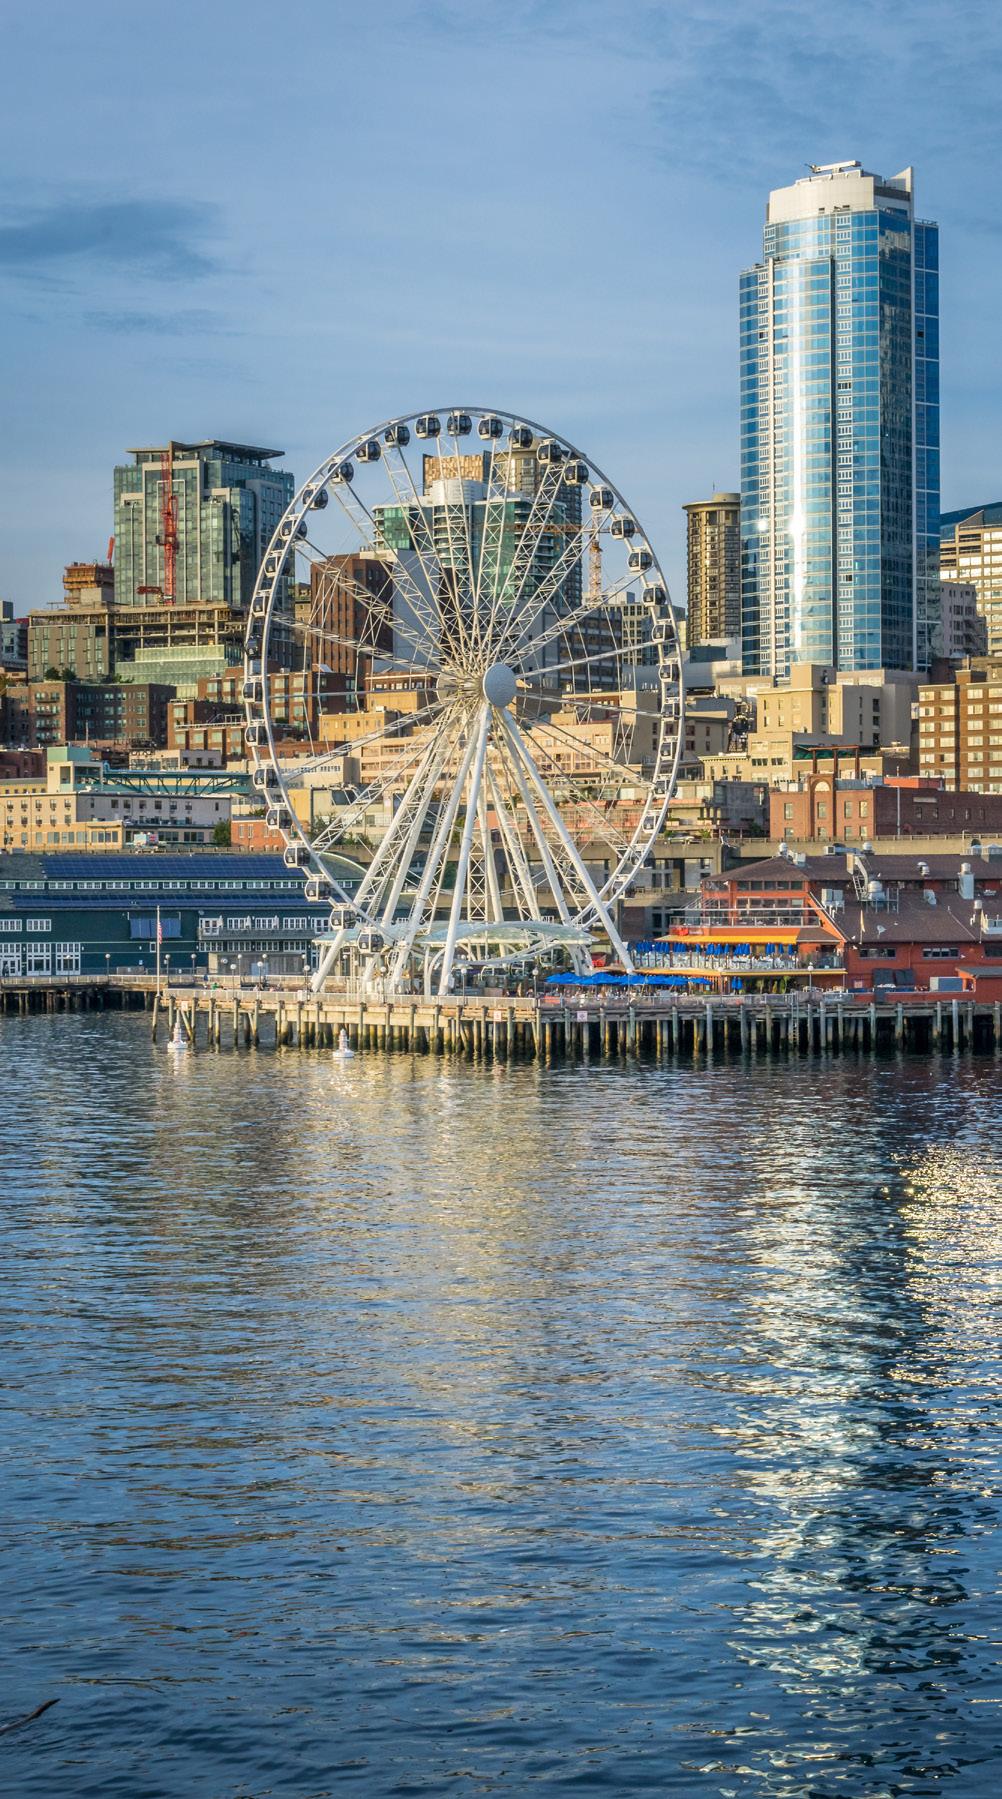 METABOLOMICS 2018 J U N E 2 4-2 8 SEATTLE, WASHINGTON 1 4 t h Annu a l C onfe renc e of t he Met ab olomic s S o c iet y About Seattle Seattle is located on the beautiful Puget Sound in the Pacific